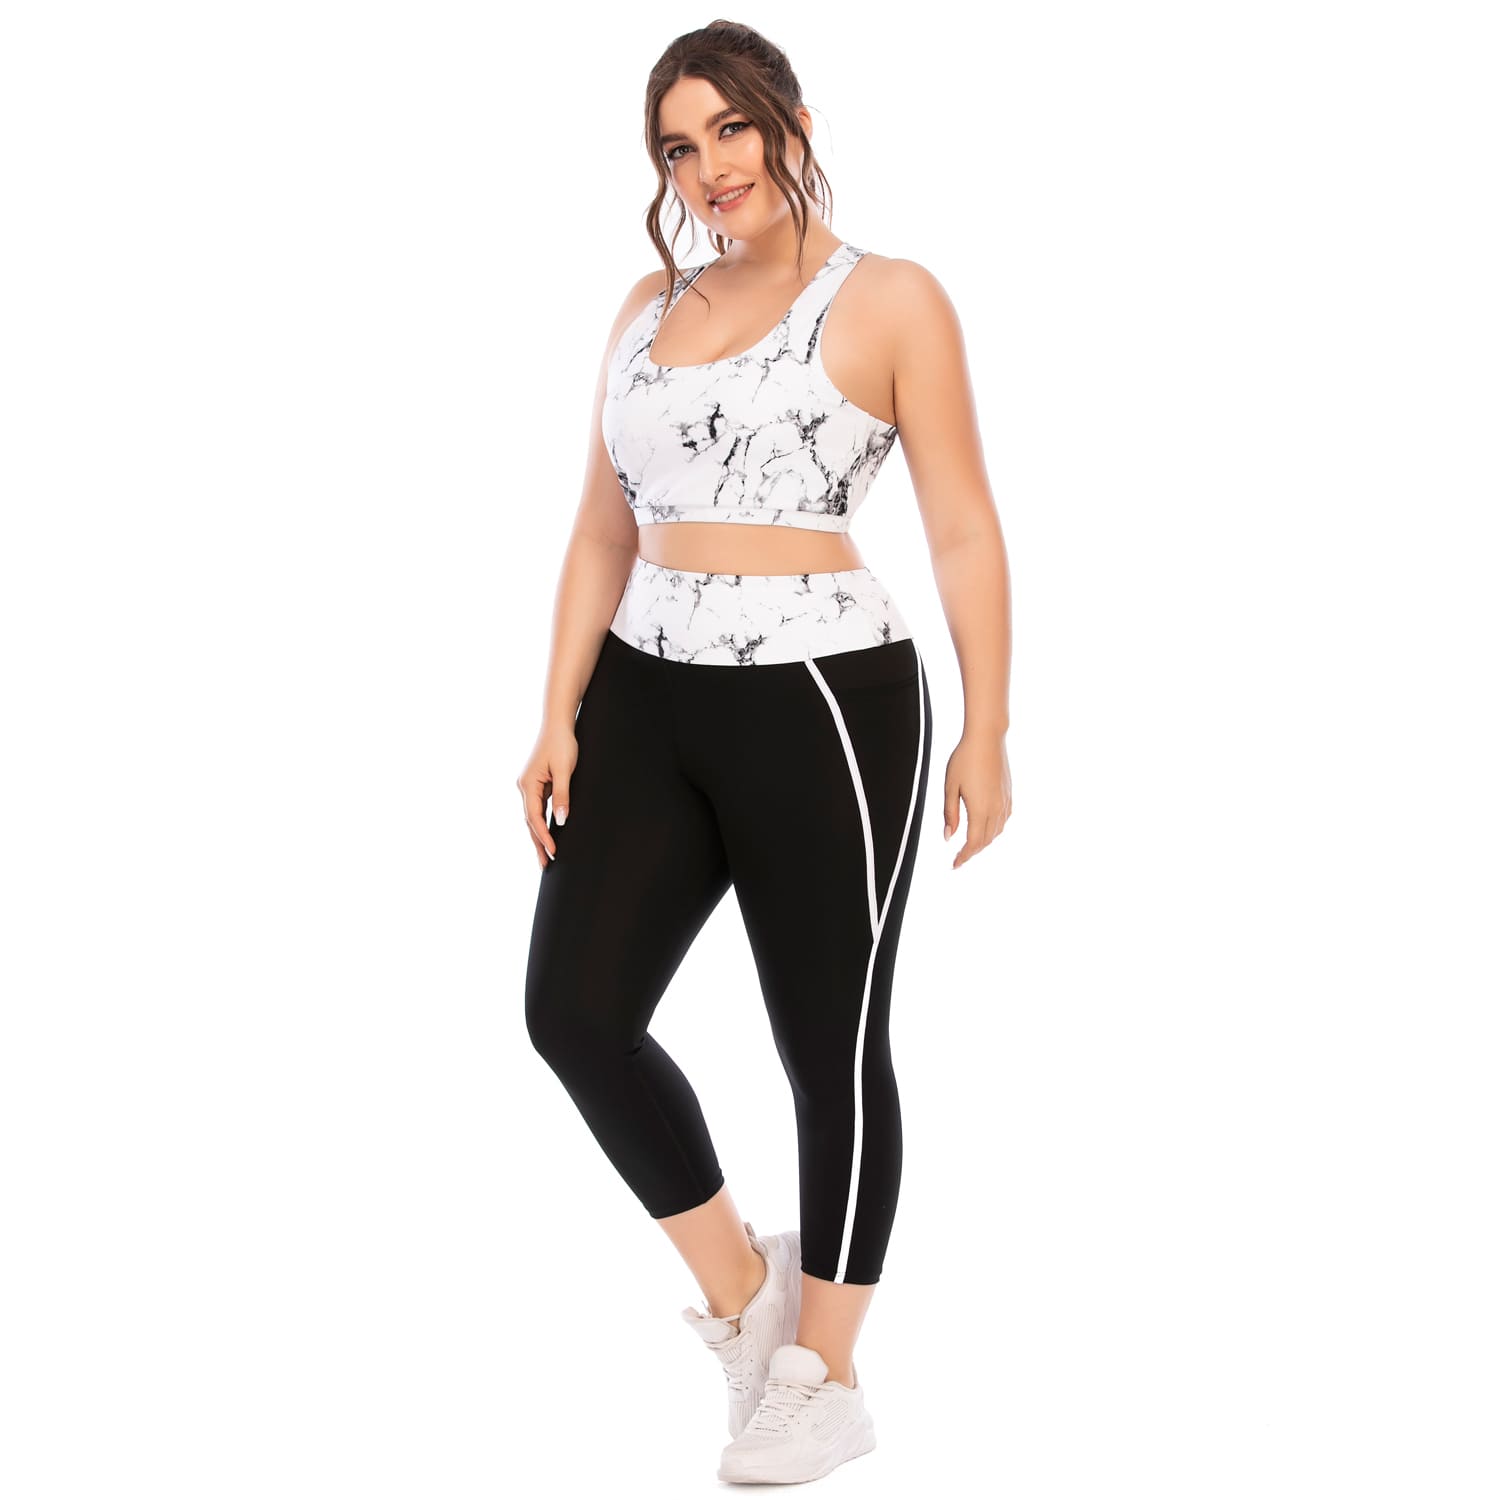 Plus Size Yoga Clothes for Women High Waist White Tracksuit